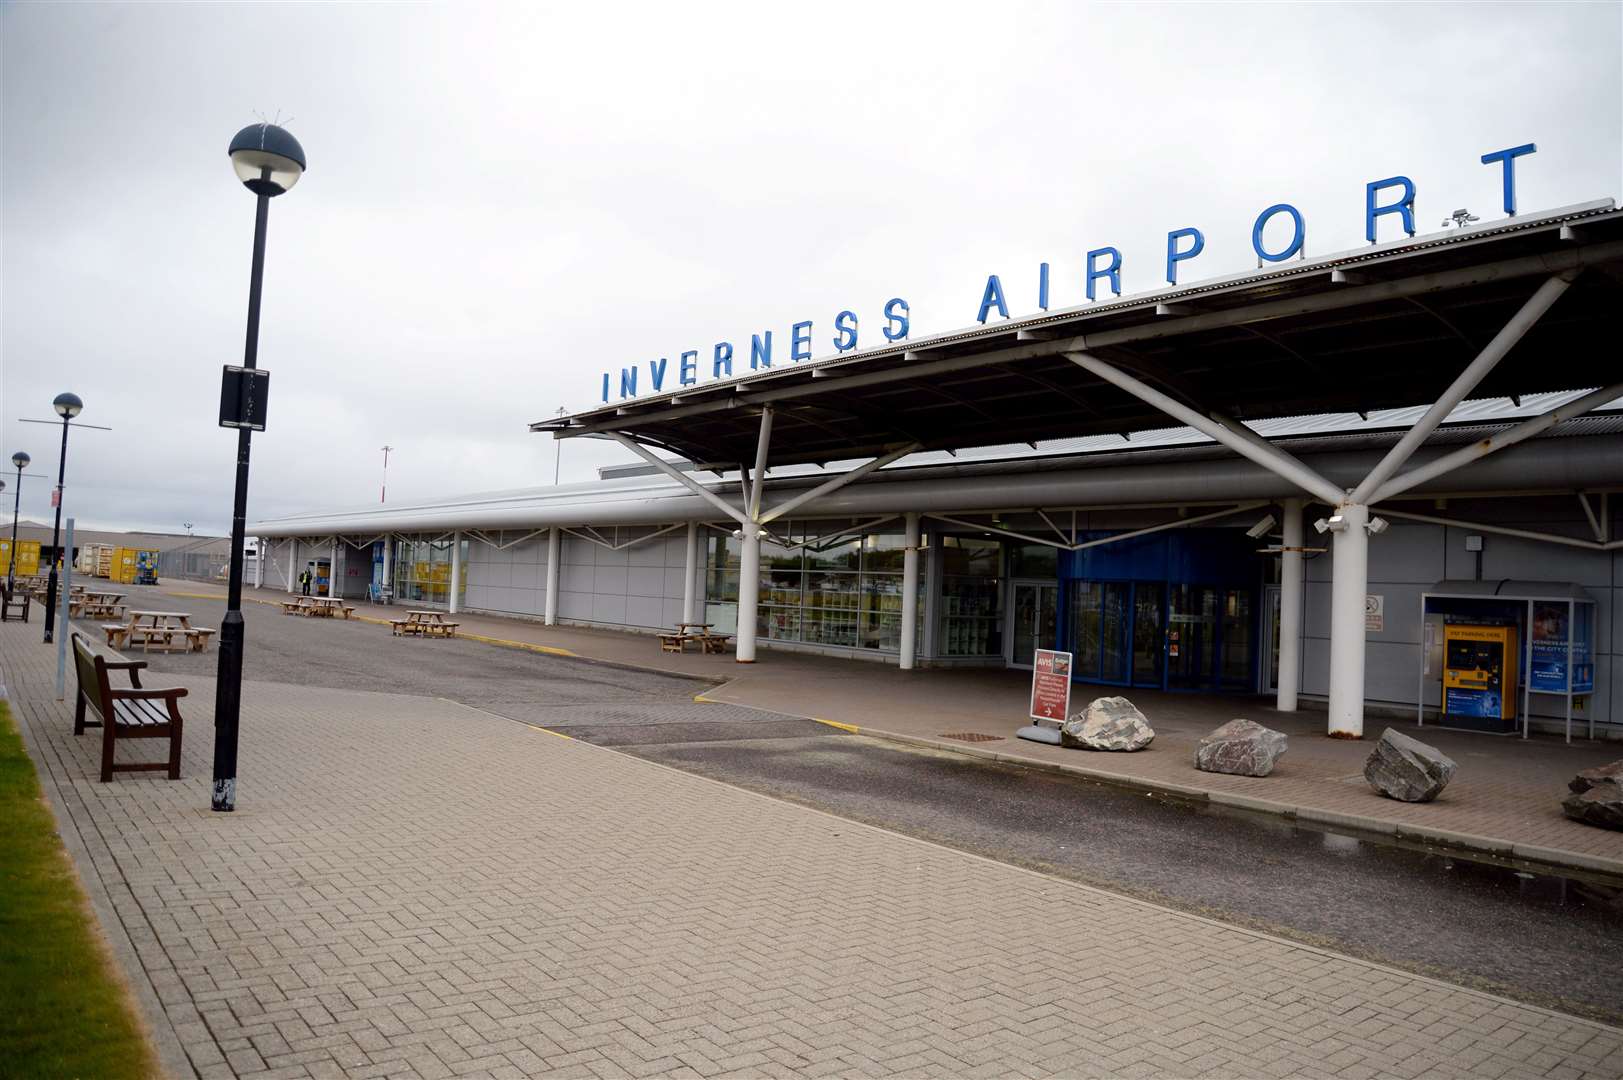 Flights to and from Inverness Airport could be influenced by the survey.